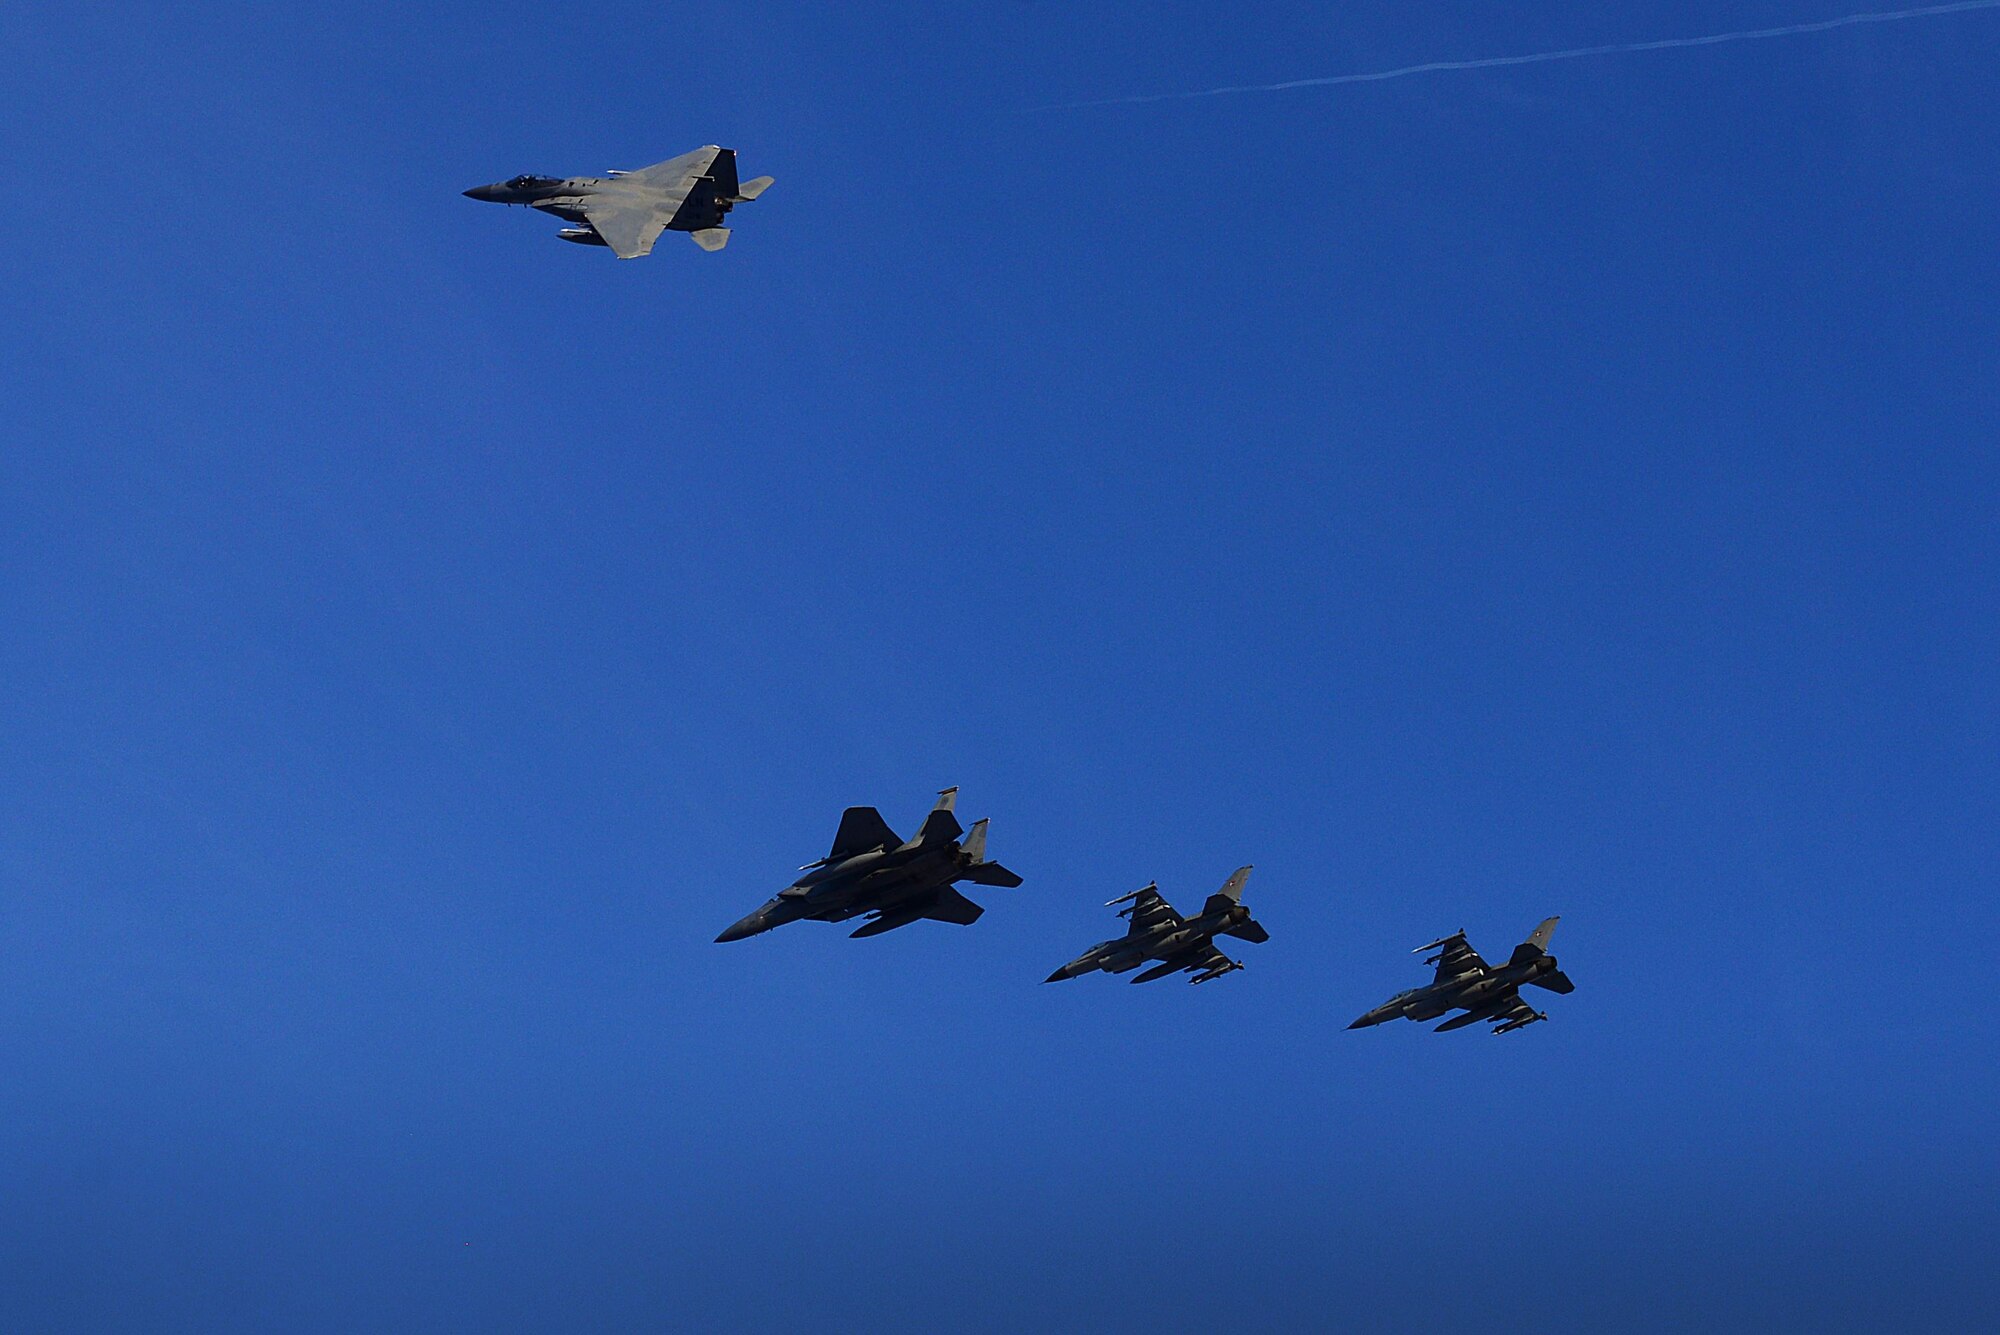 U.S. F-15C Eagles from the 493rd Expeditionary Fighter Squadron peel away from a formation with Royal Danish F-16's to signify the transfer of the NATO Baltic Air Police mission at Siauliai Air Base, Lithuania Jan. 8. NATO Air Policing is a peacetime collective defense mission, safeguarding the integrity of the NATO Alliance member’s airspace. (U.S. Air Force photo/ Tech. Sgt. Matthew Plew)